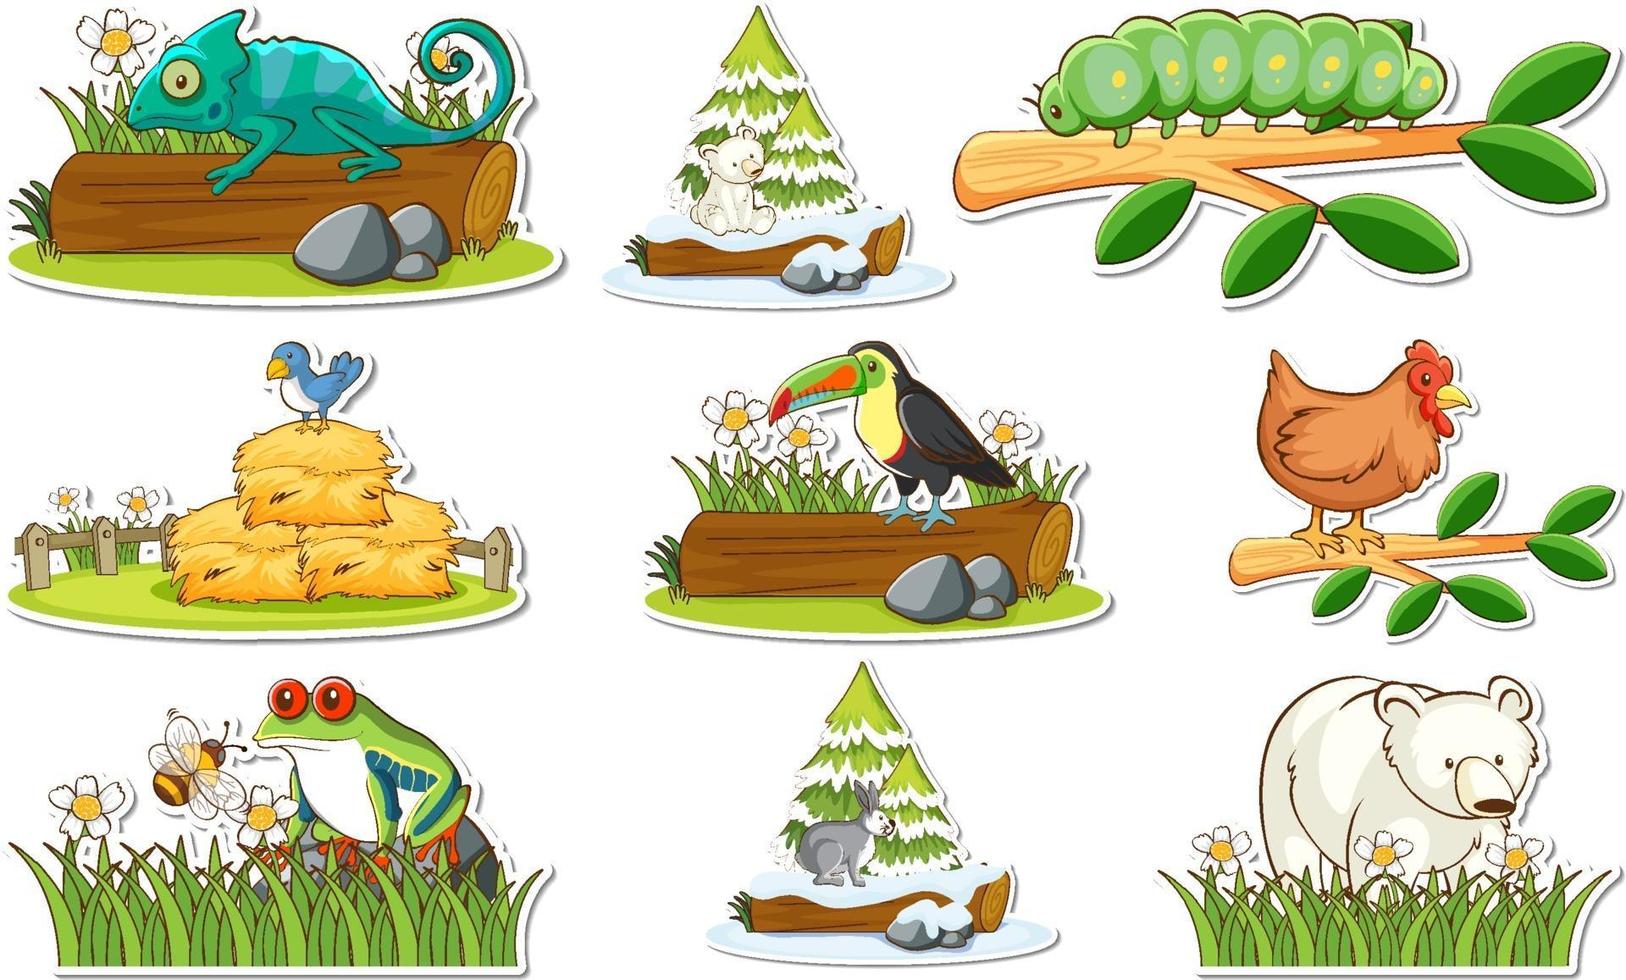 Sticker set with different wild animals and nature elements vector